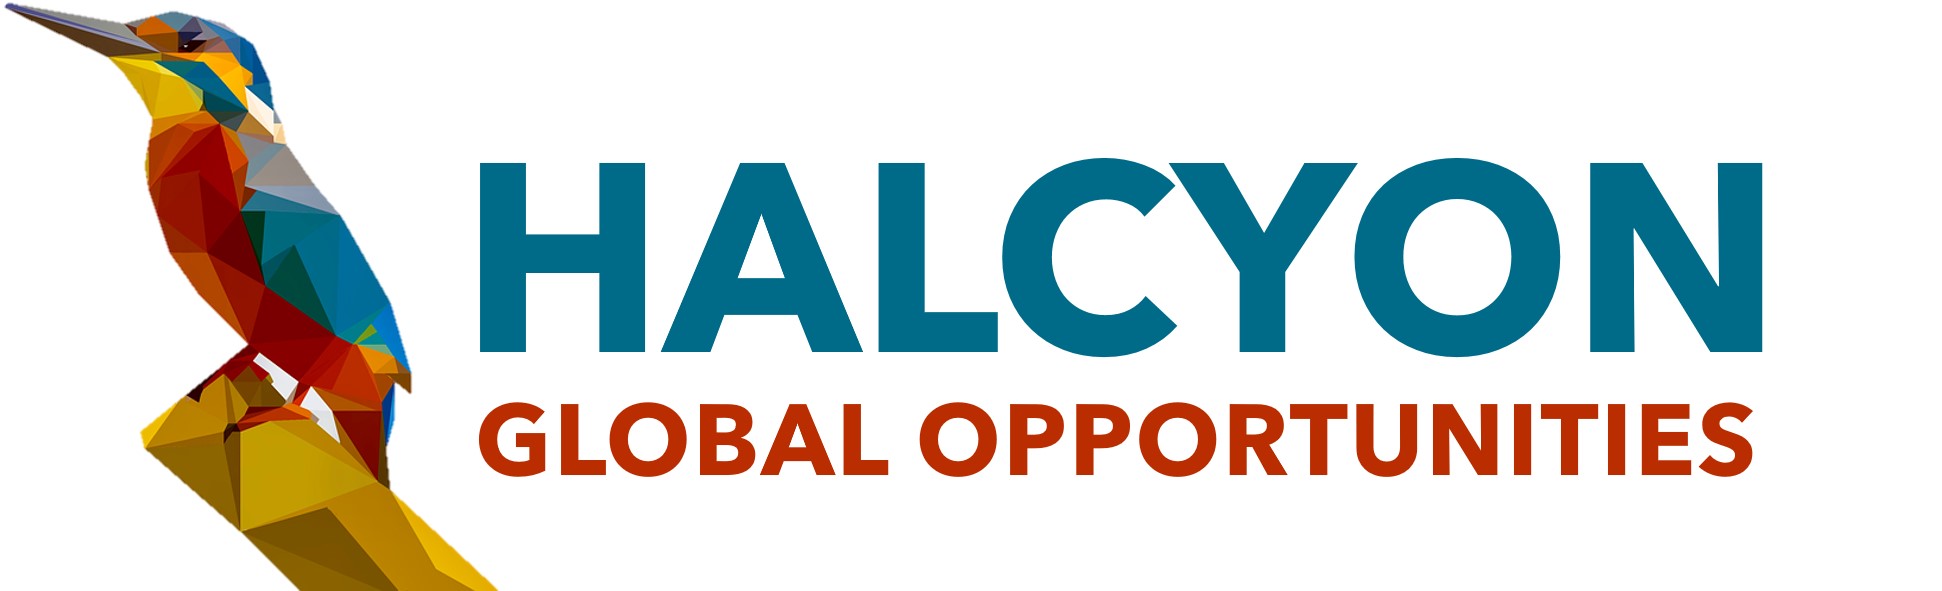 Part-time Intern in Asset Management team at Halcyon Global Opportunities (formerly SPRING) - March 2021, 3 months